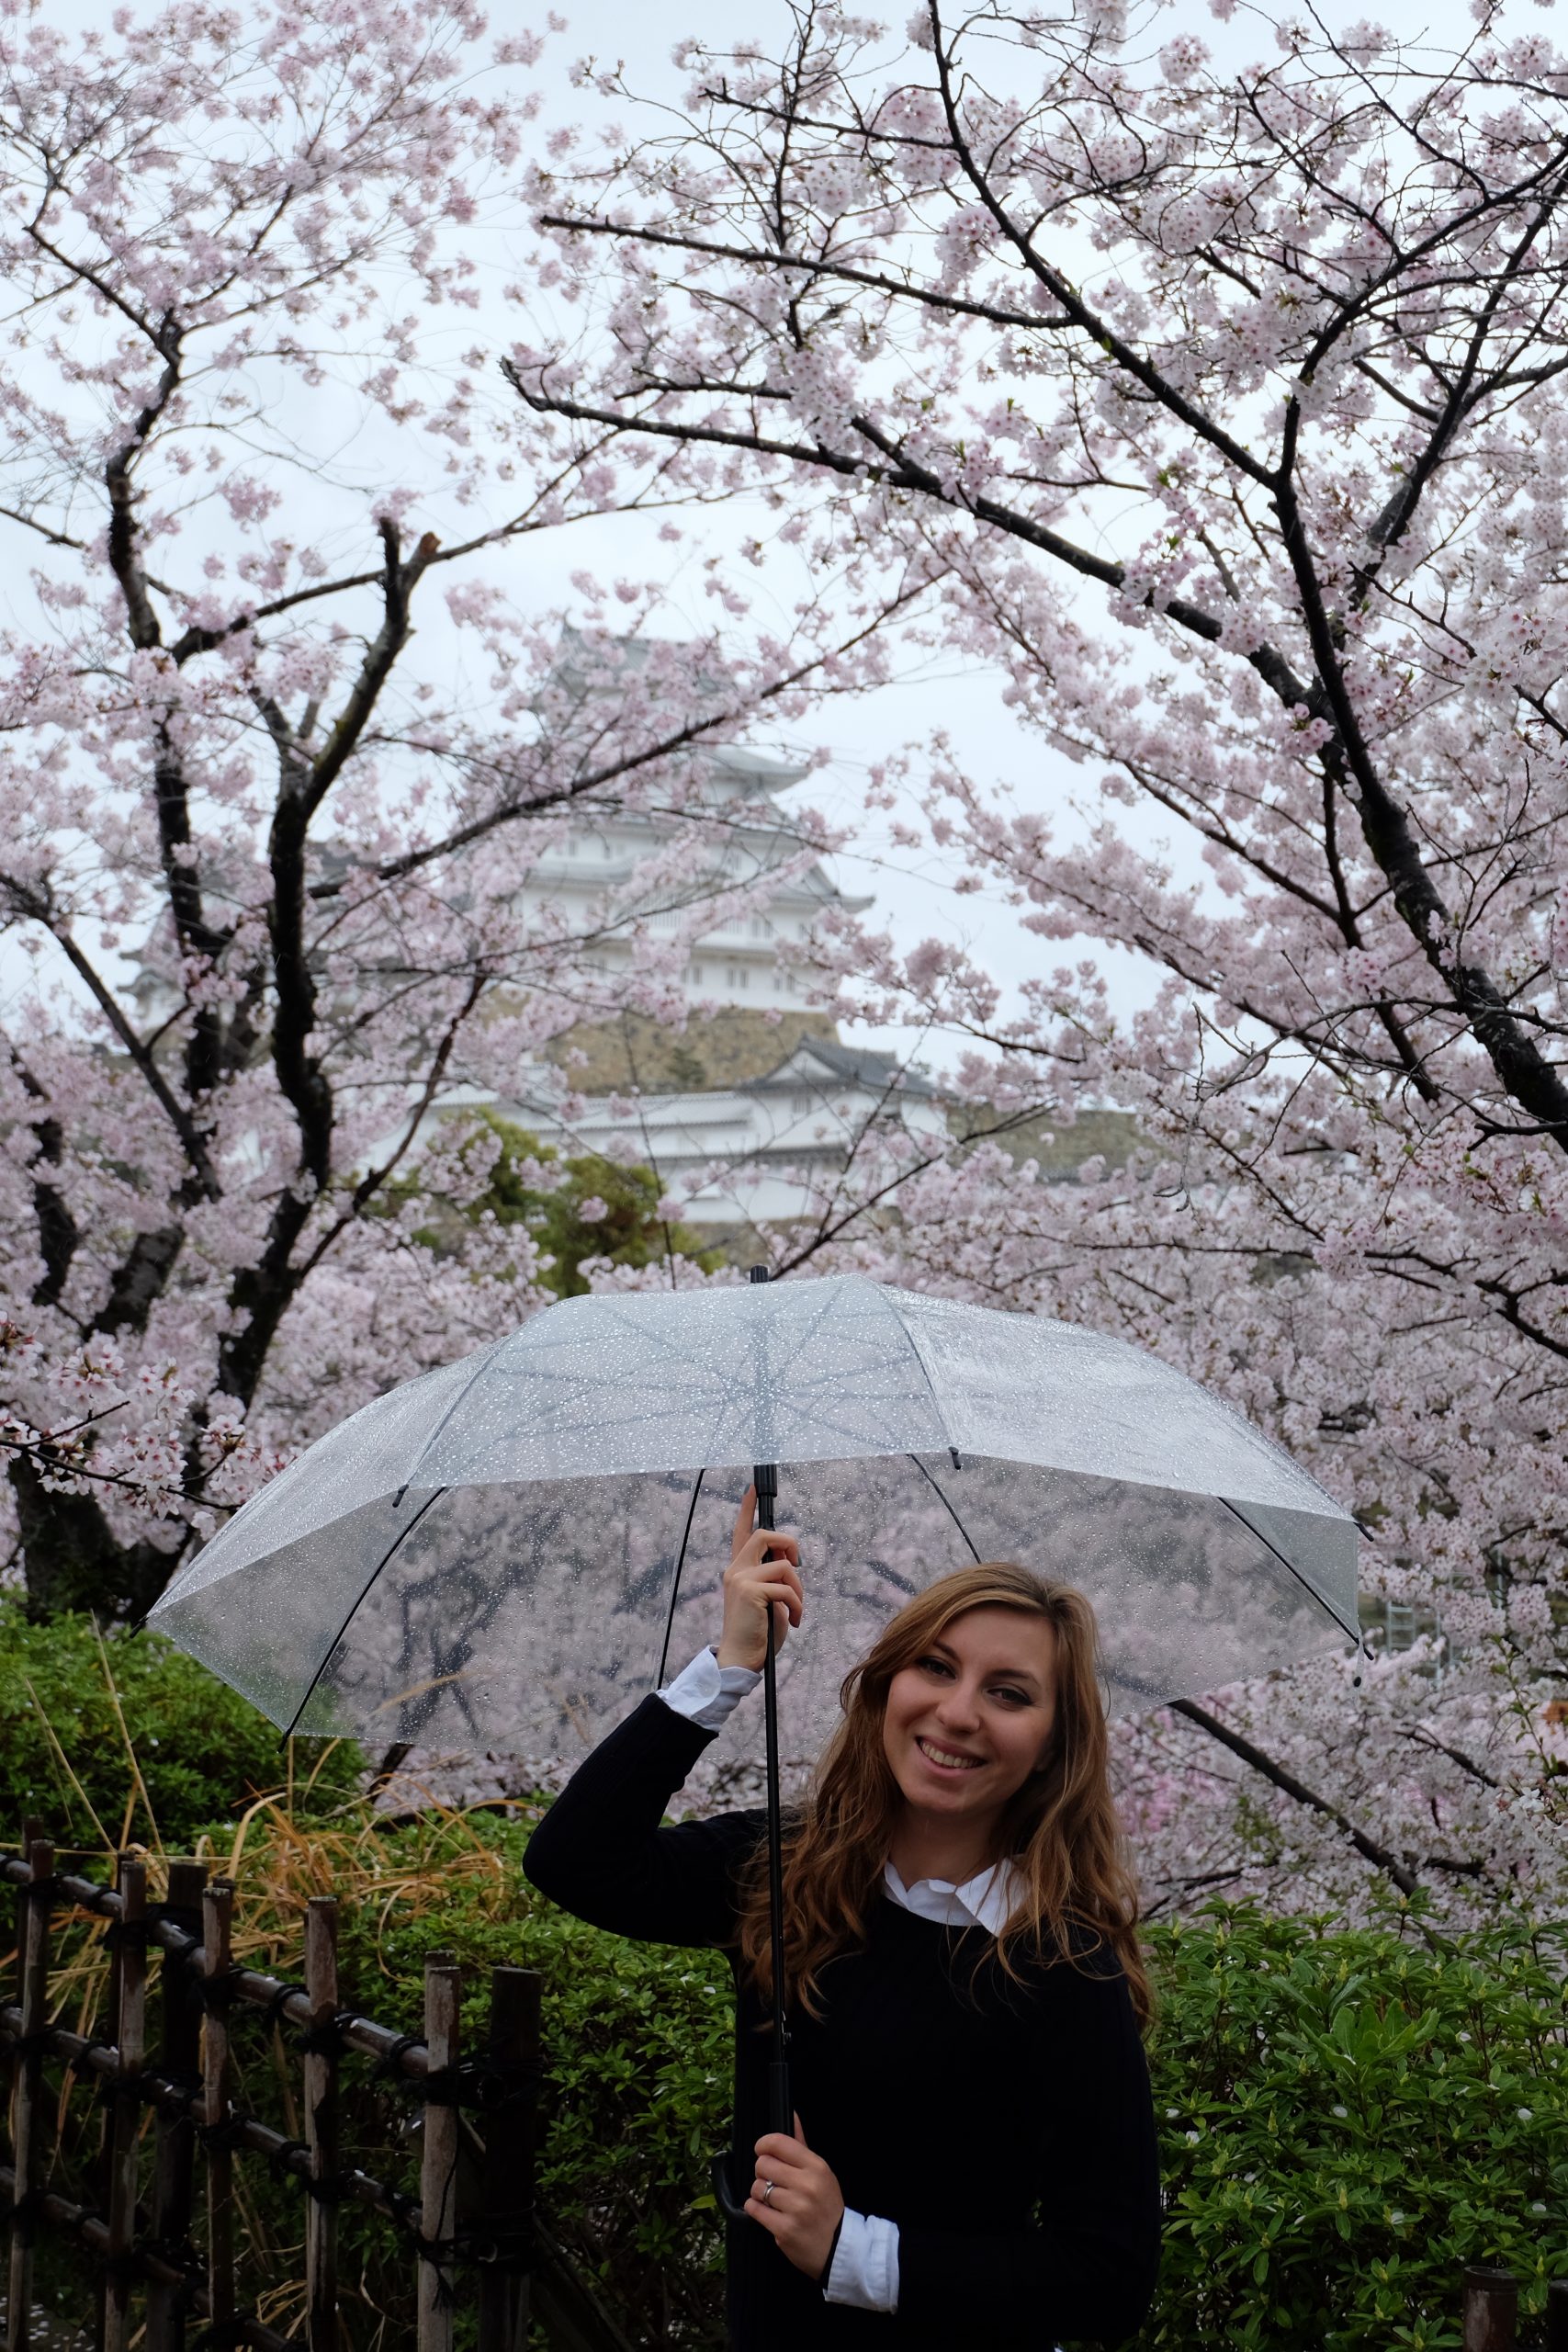 Cory visiting himeji in spring on a rainy day